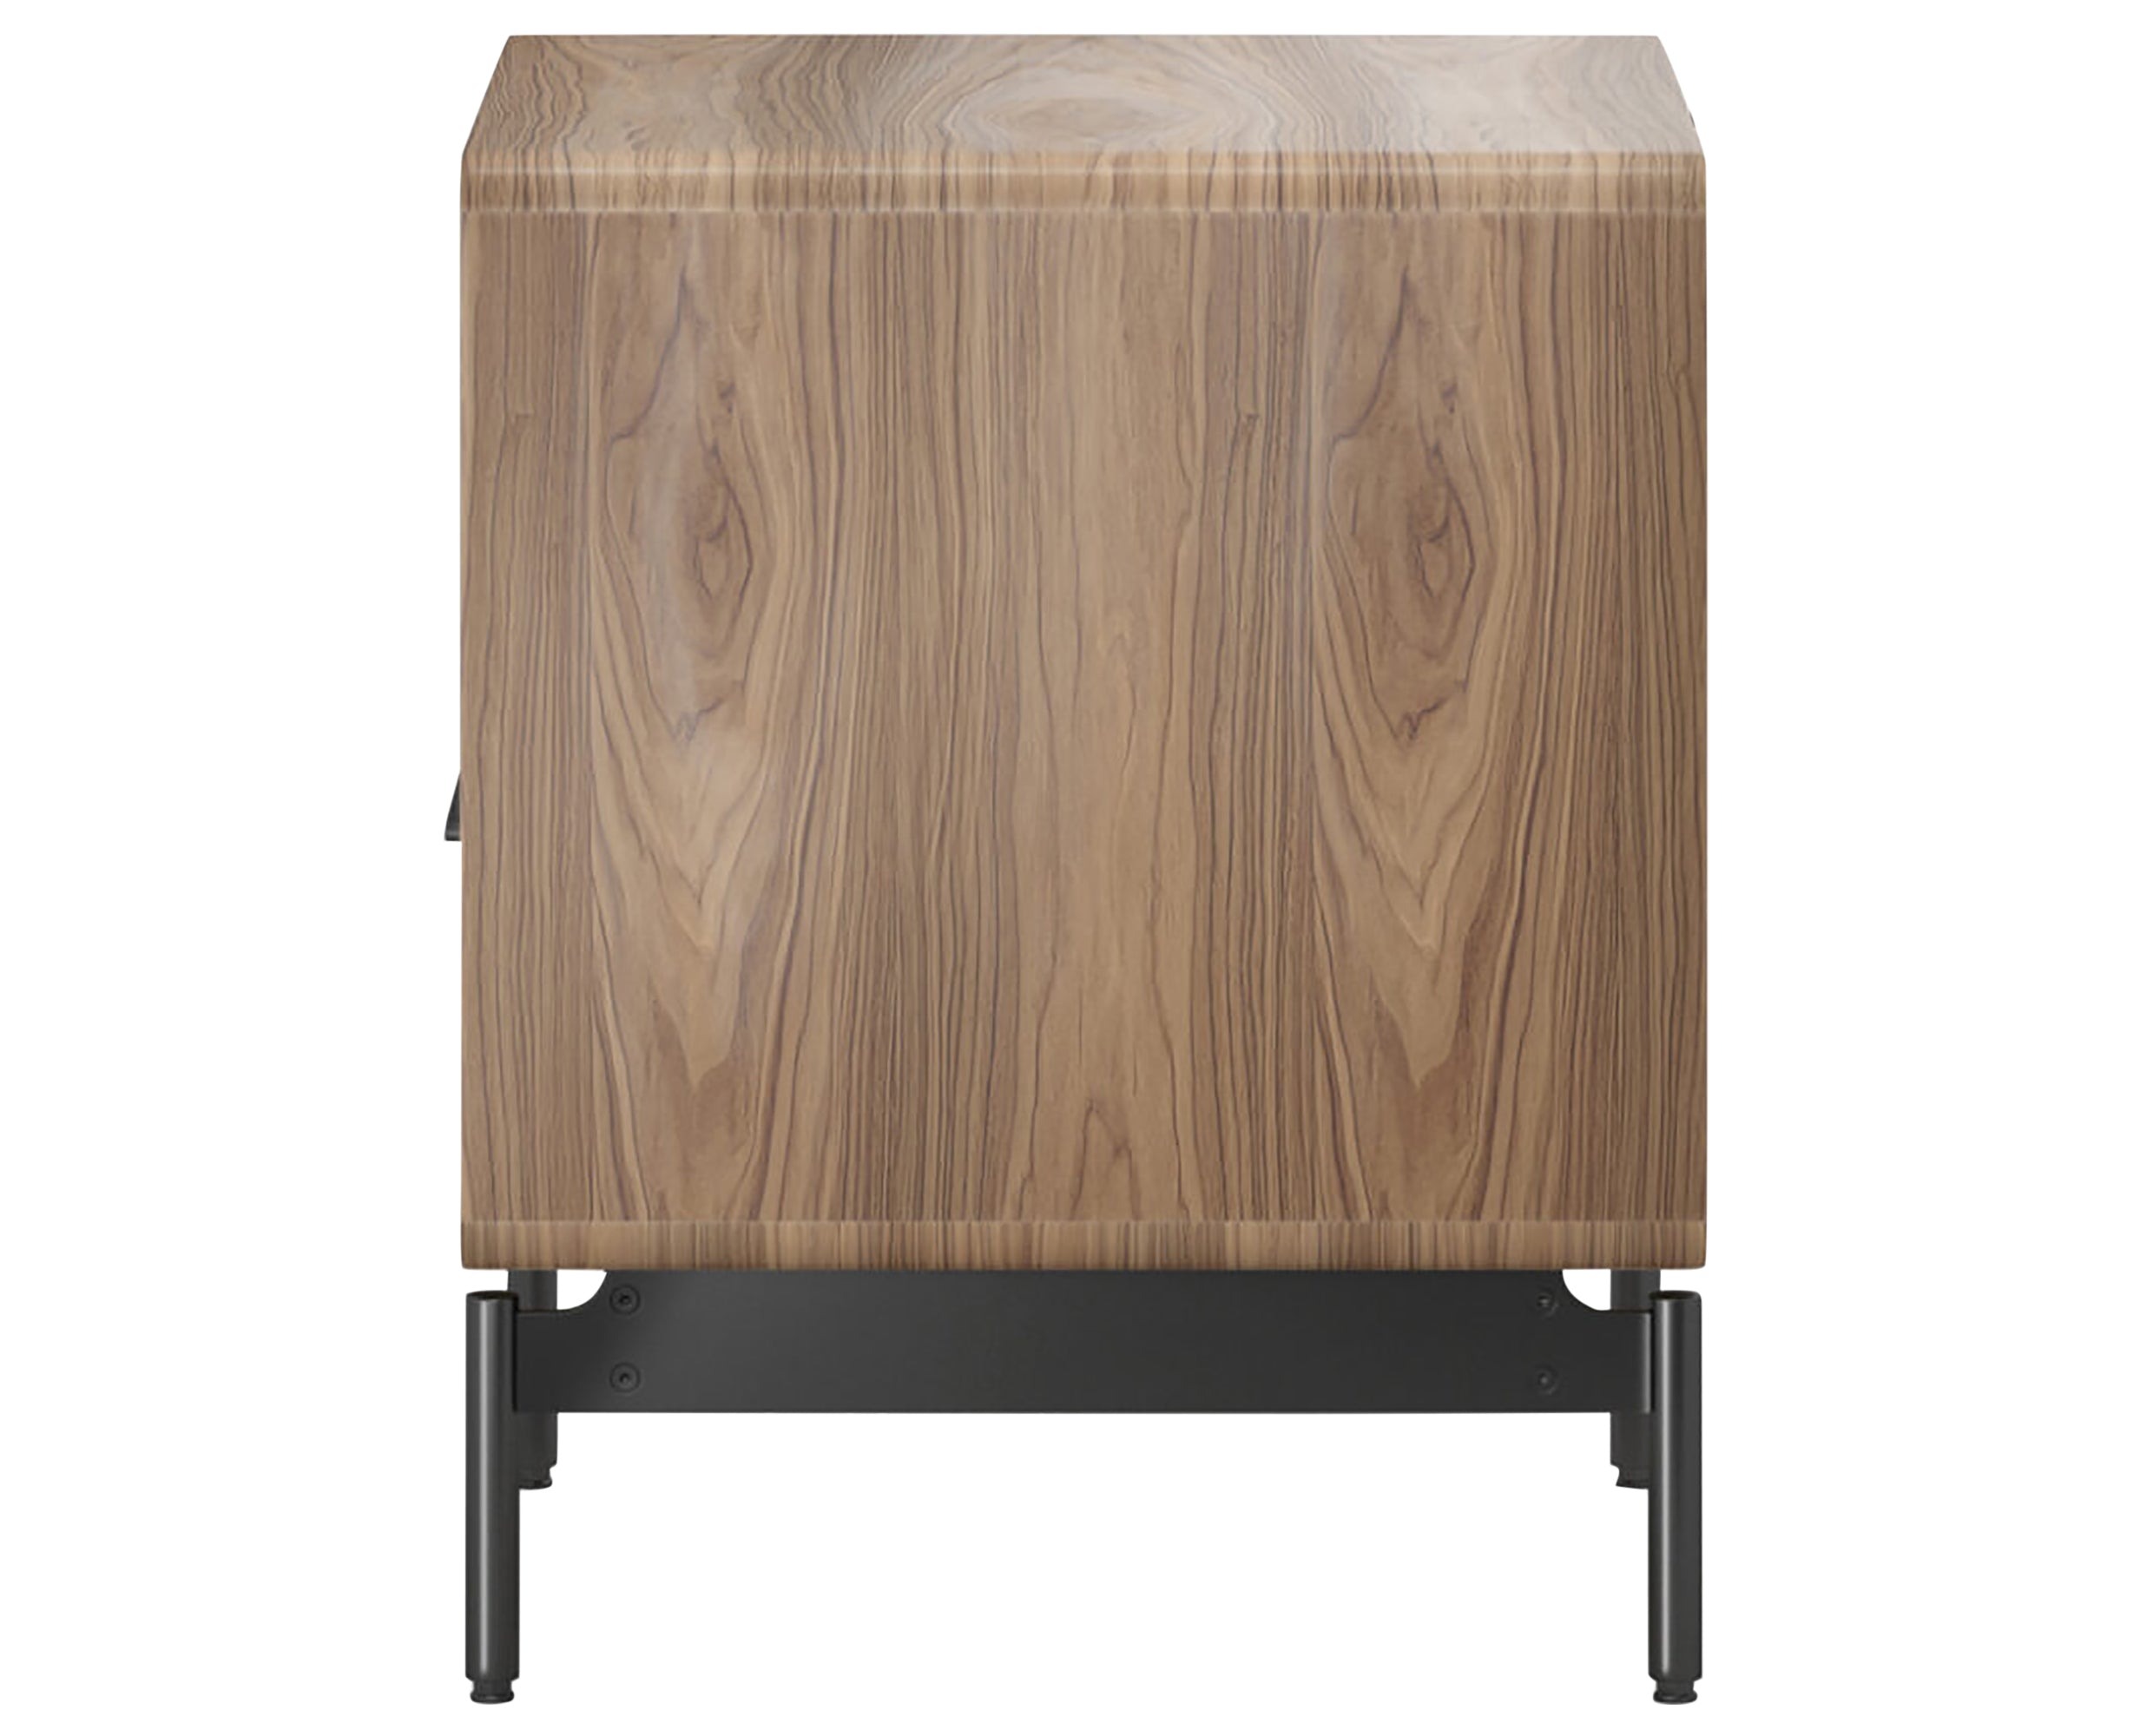 Natural Walnut with Powder Coated Steel | BDI Linq 22" Nightstand | Valley Ridge Furniture